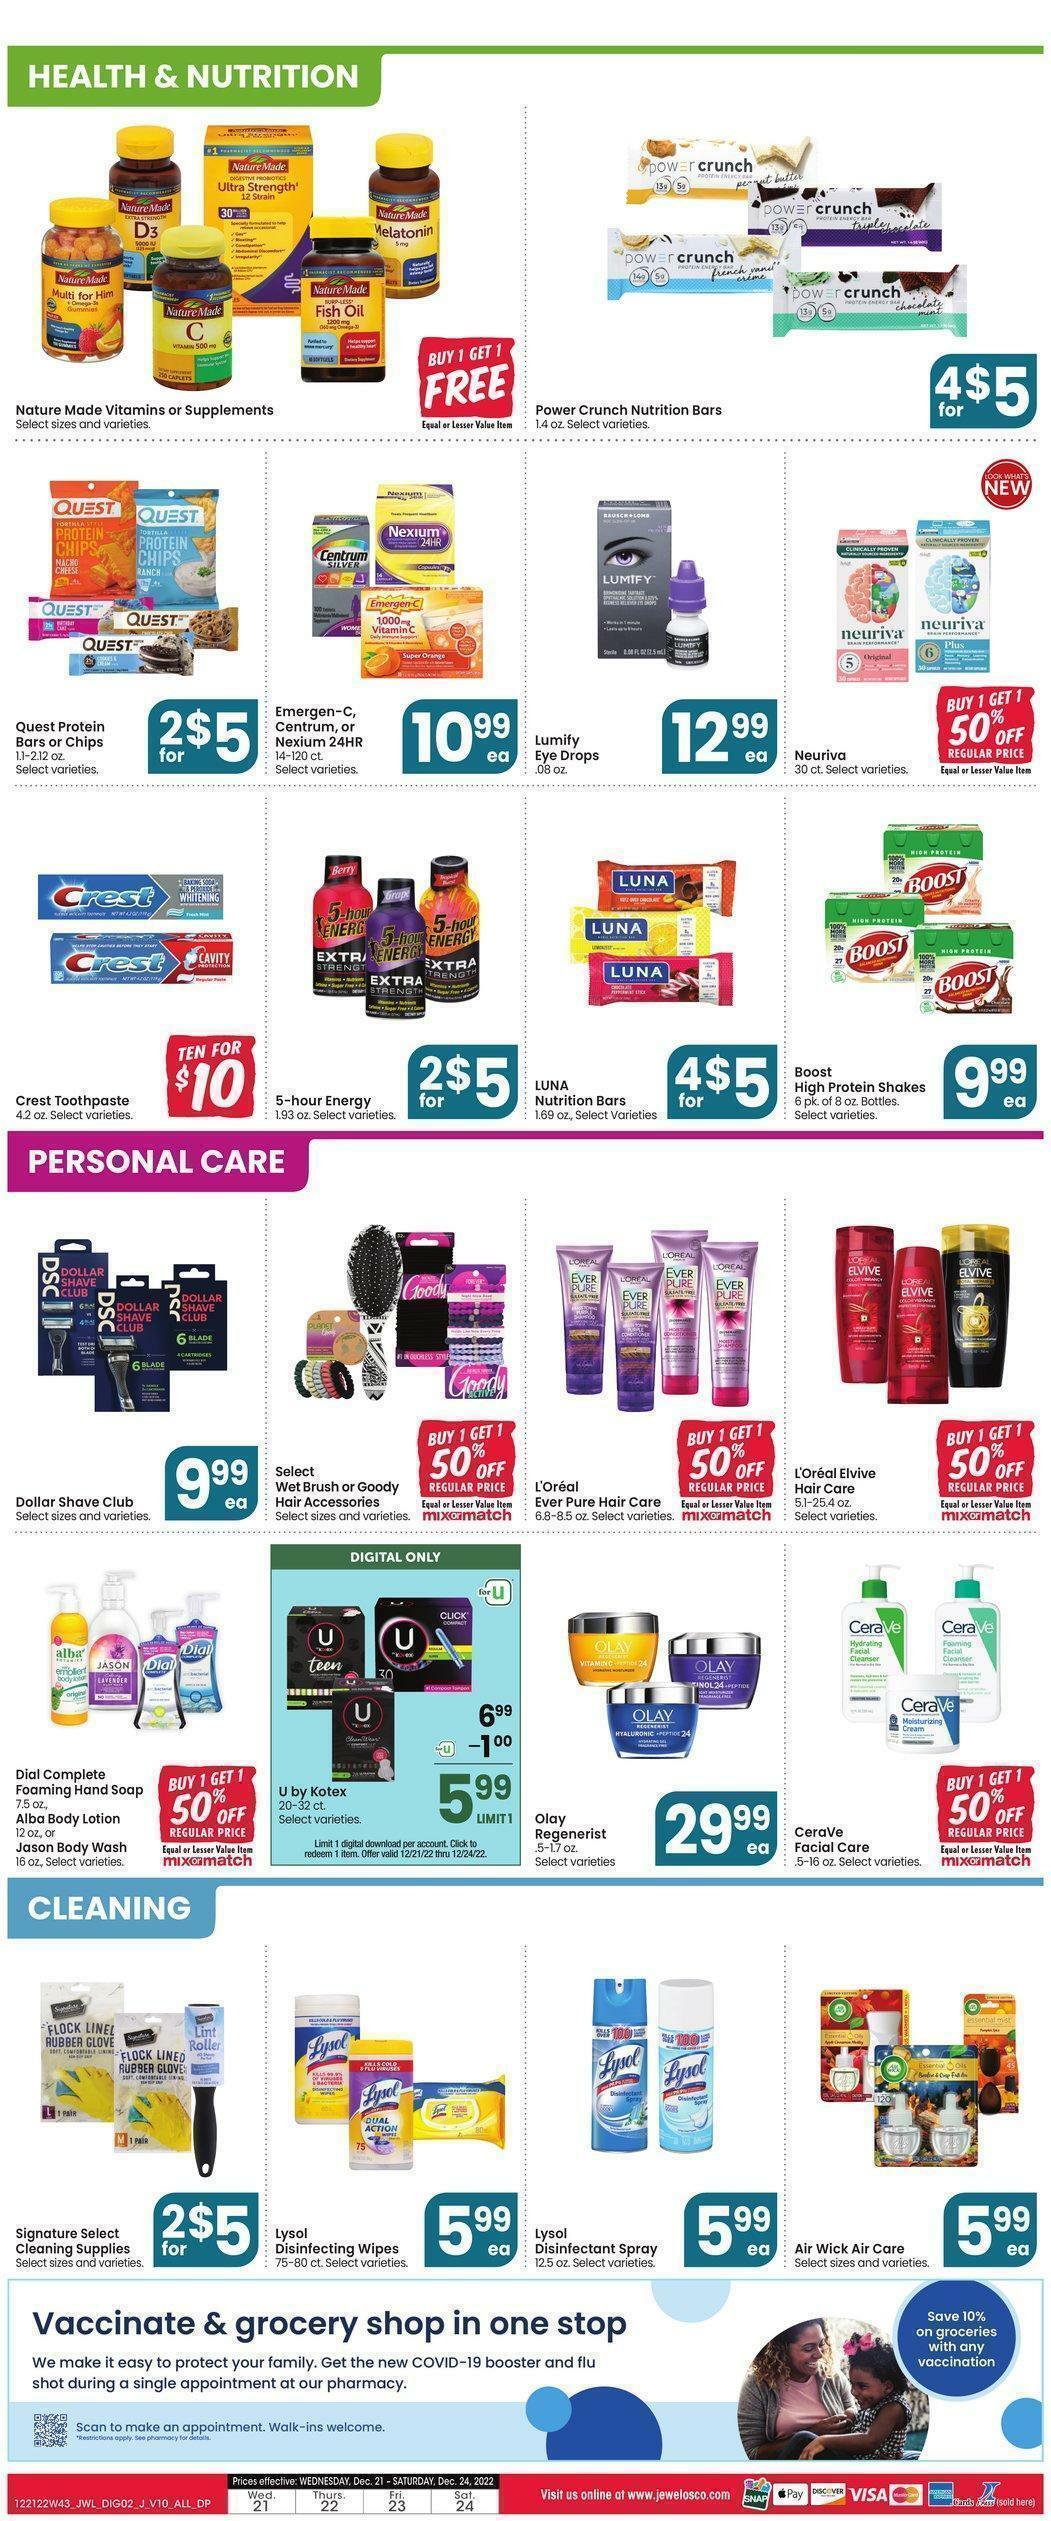 Jewel Osco Last Minute Holiday Savings Weekly Ad from December 21